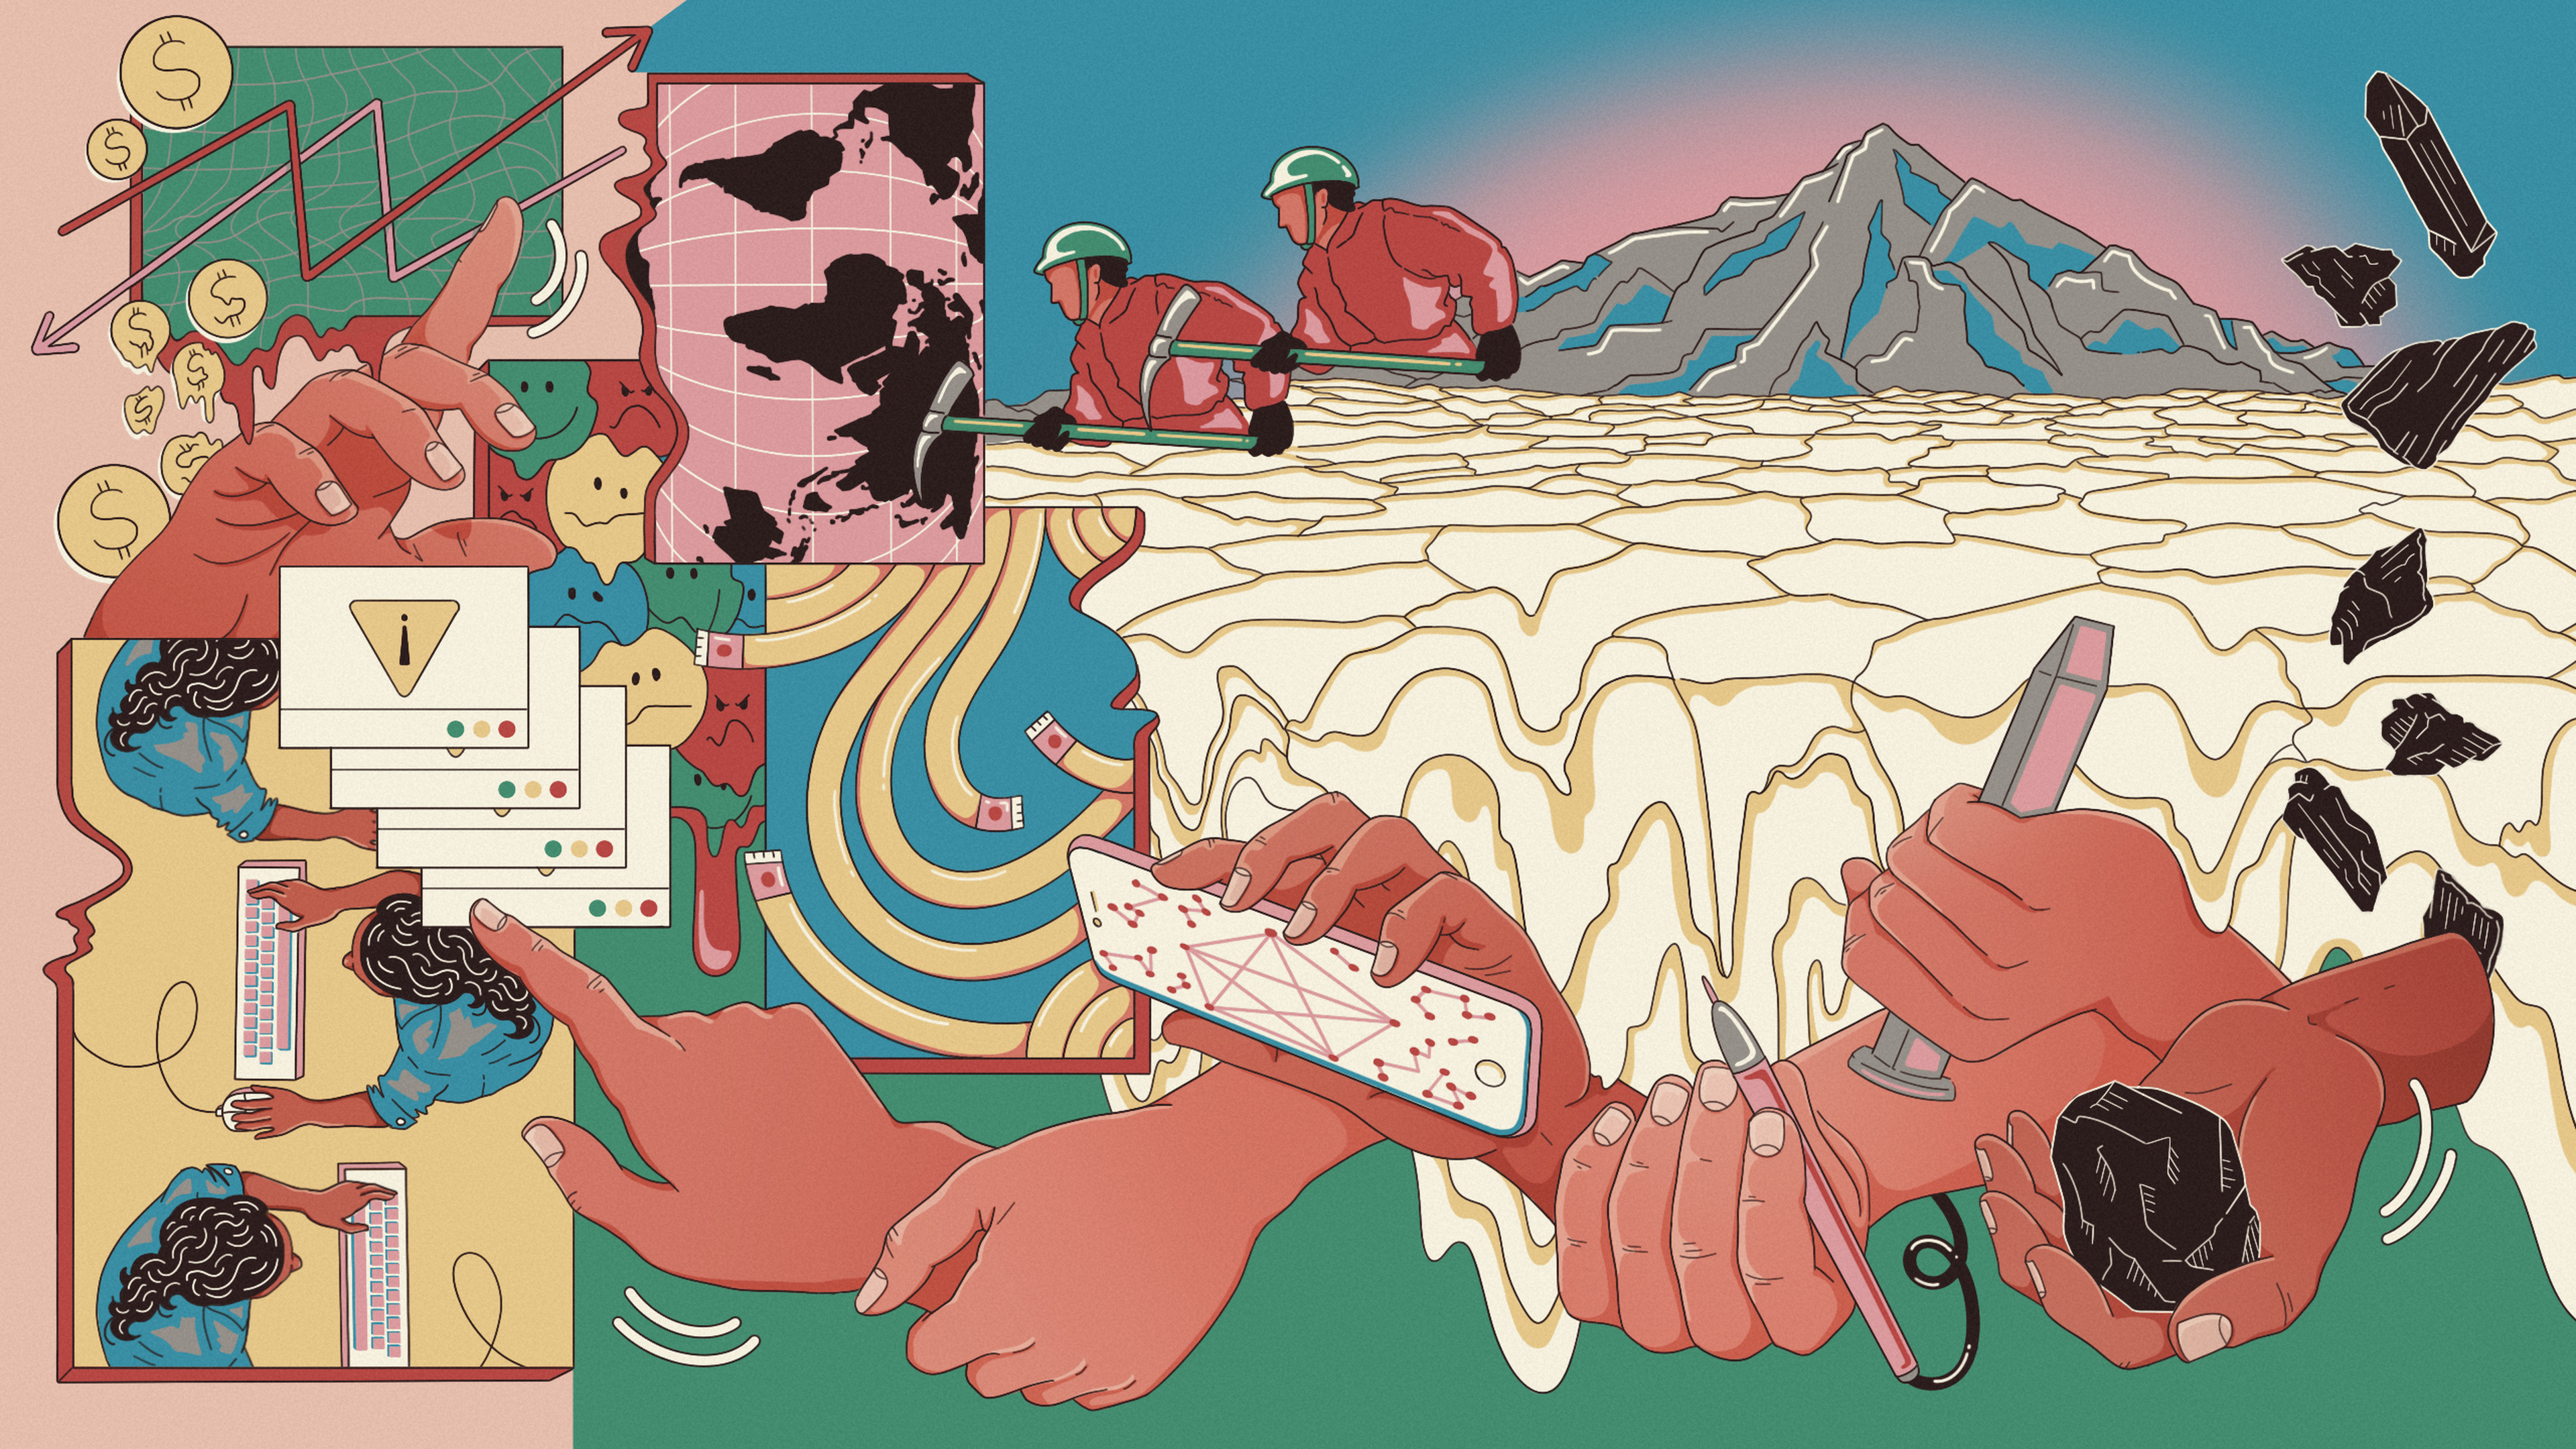 A brightly coloured illustration which can be viewed in any direction. It has several scenes within it: miners digging in front of a huge mountain representing mineral resources, a hand holding a lump of coal or carbon, hands manipulating stock charts and error messages, as well as some women performing tasks on computers.